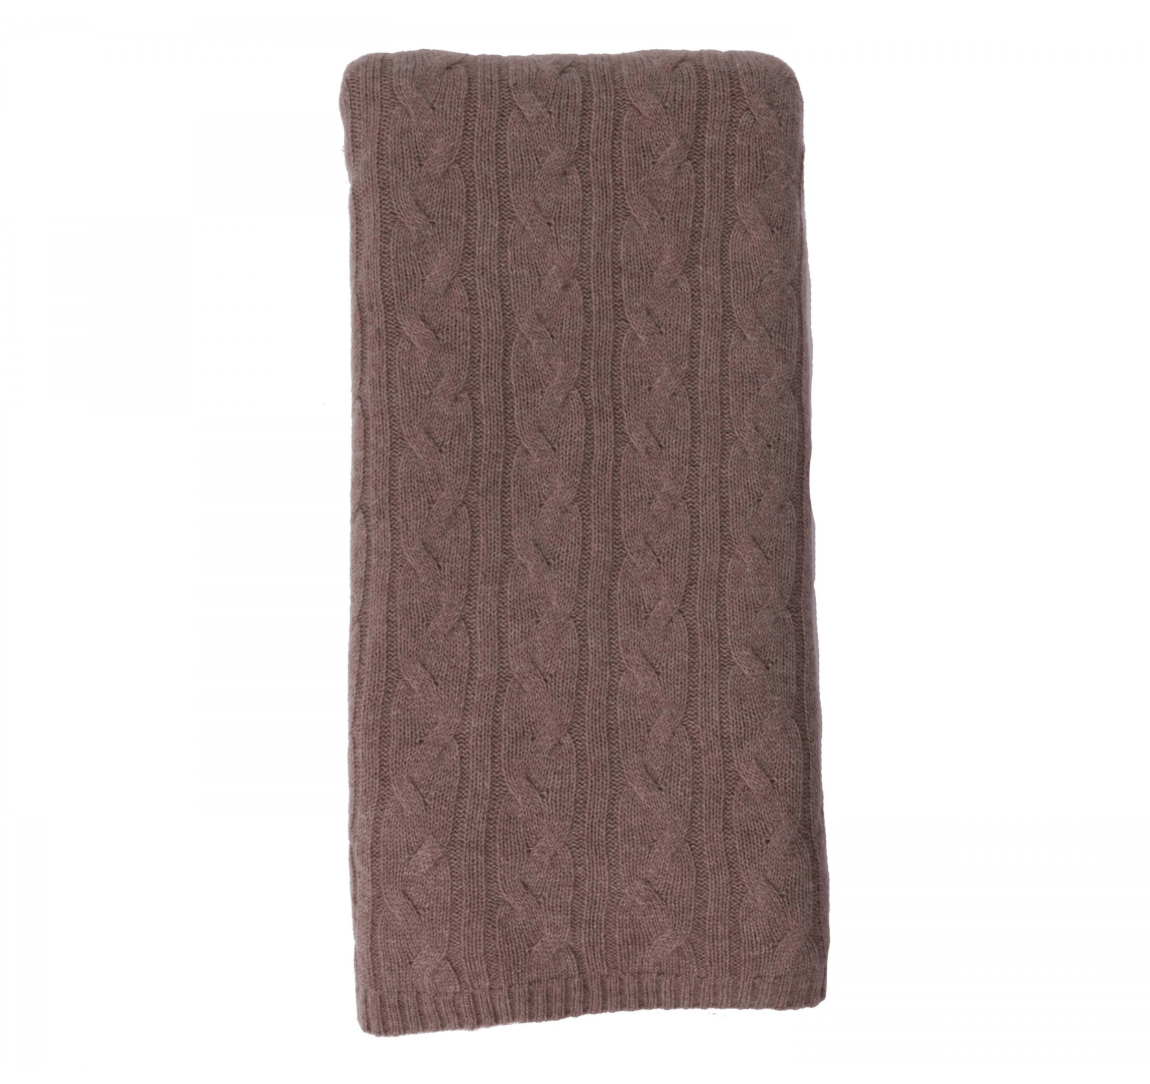 100% Cashmere Throw - Natural 352 - Alashan Cashmere at Fig Linens and Home